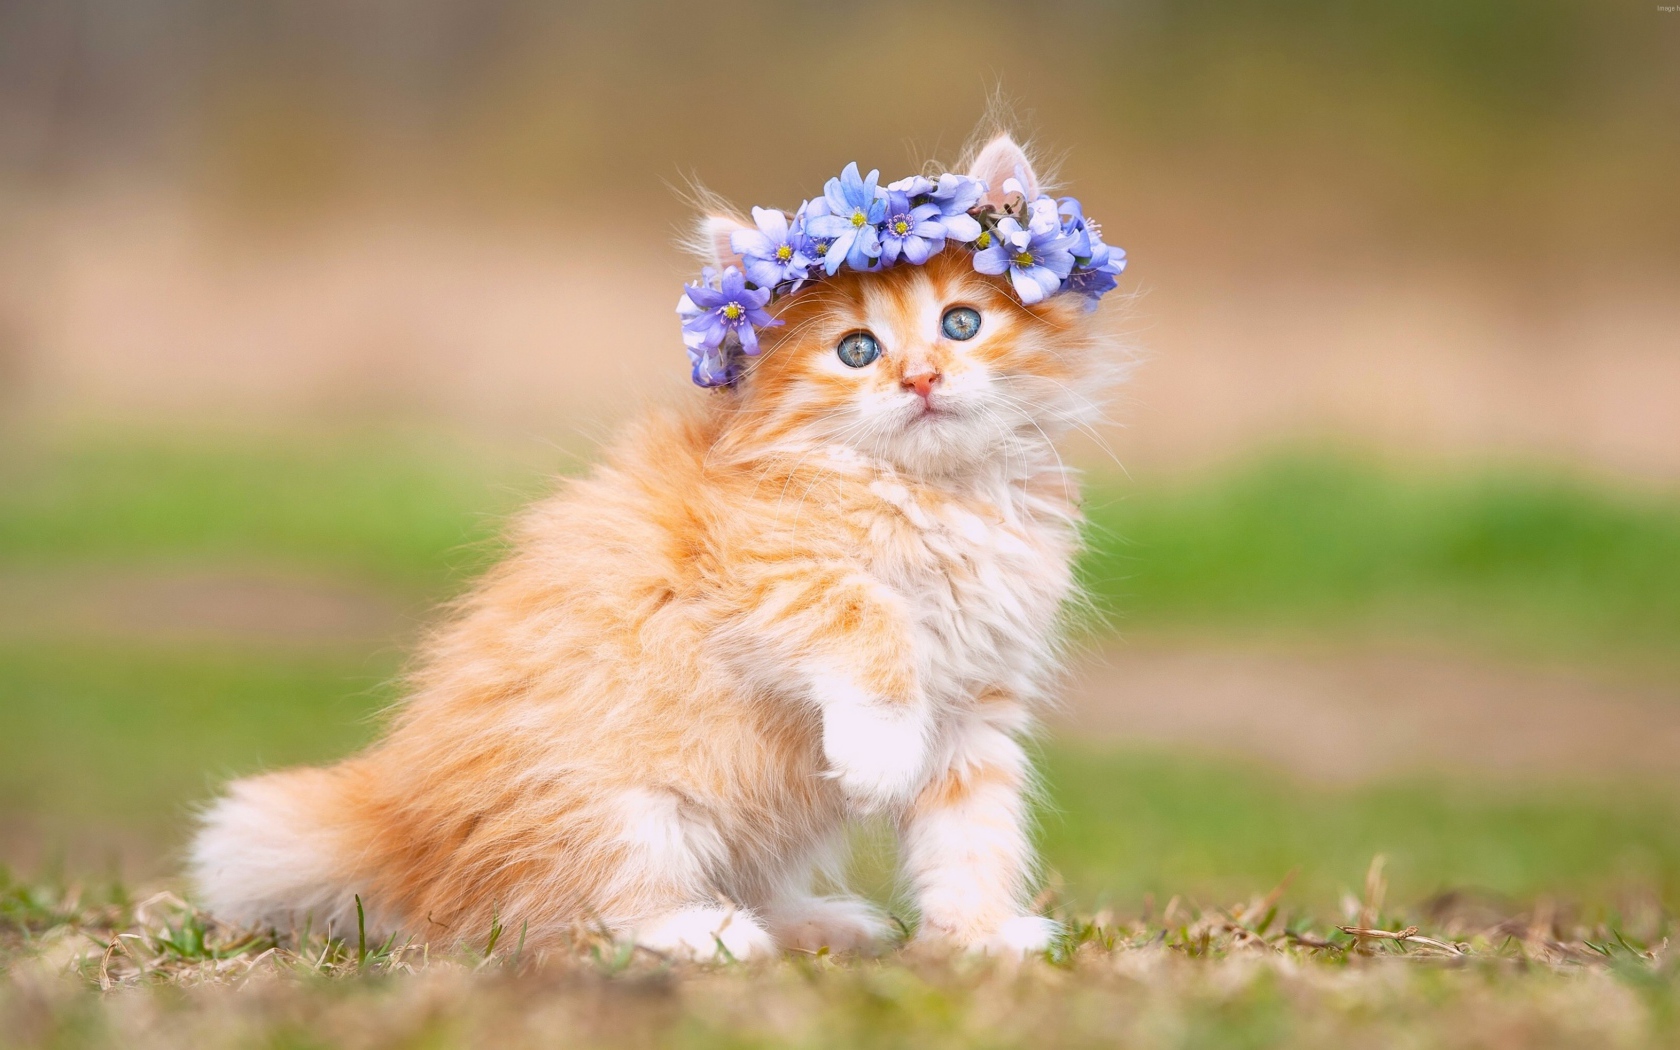 Little red kitten with flowers on the head